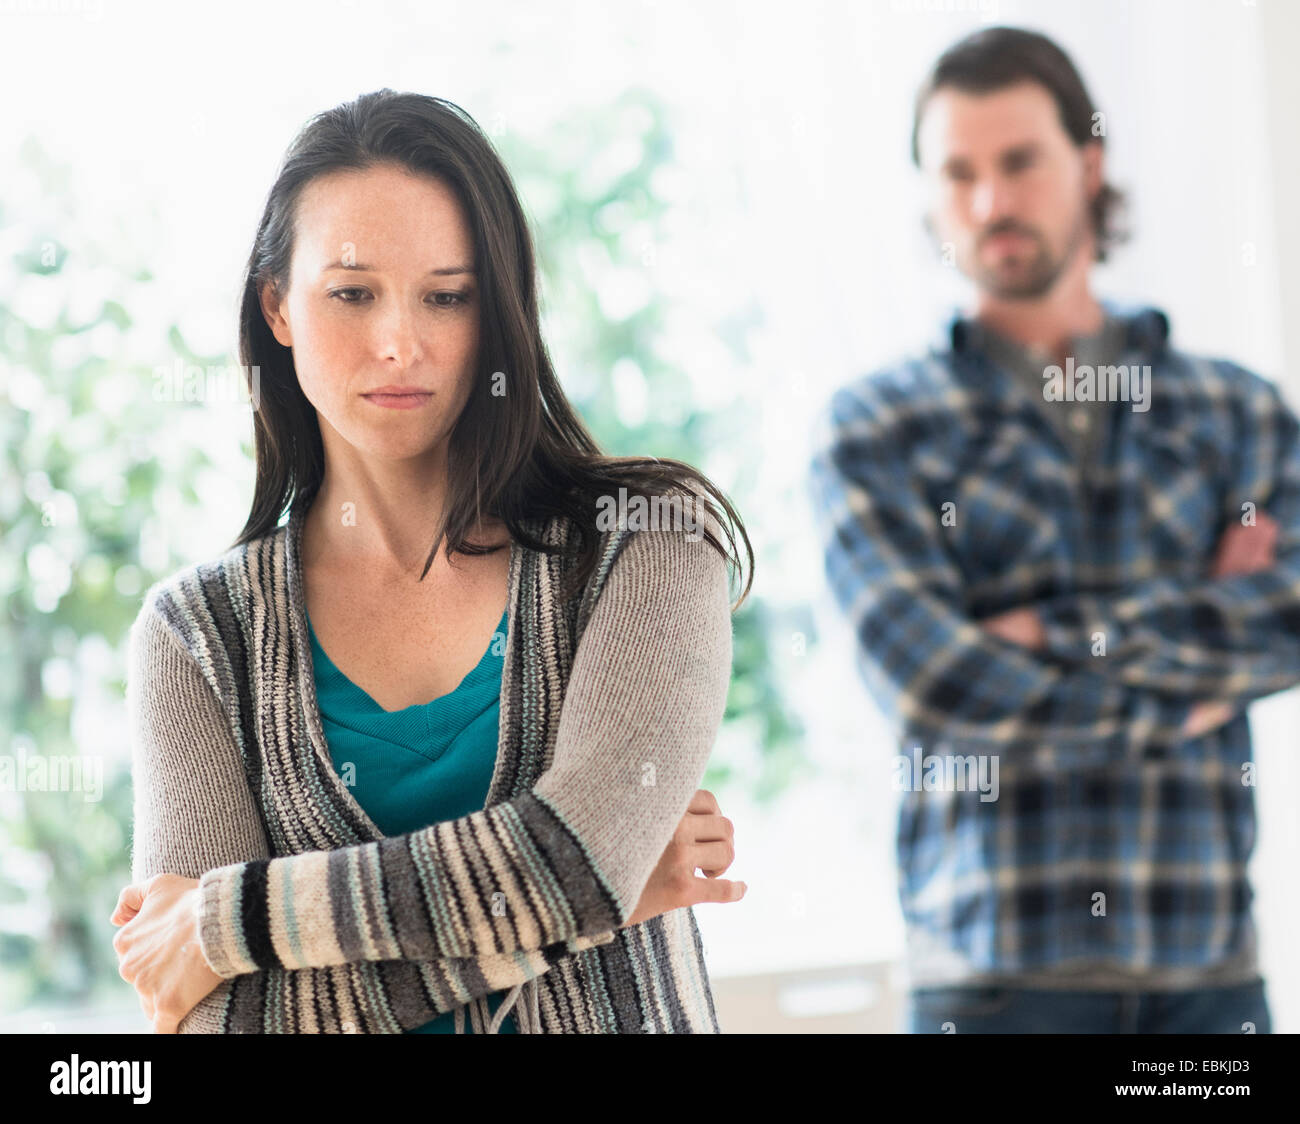 Sad woman with arms crossed, man in background Stock Photo